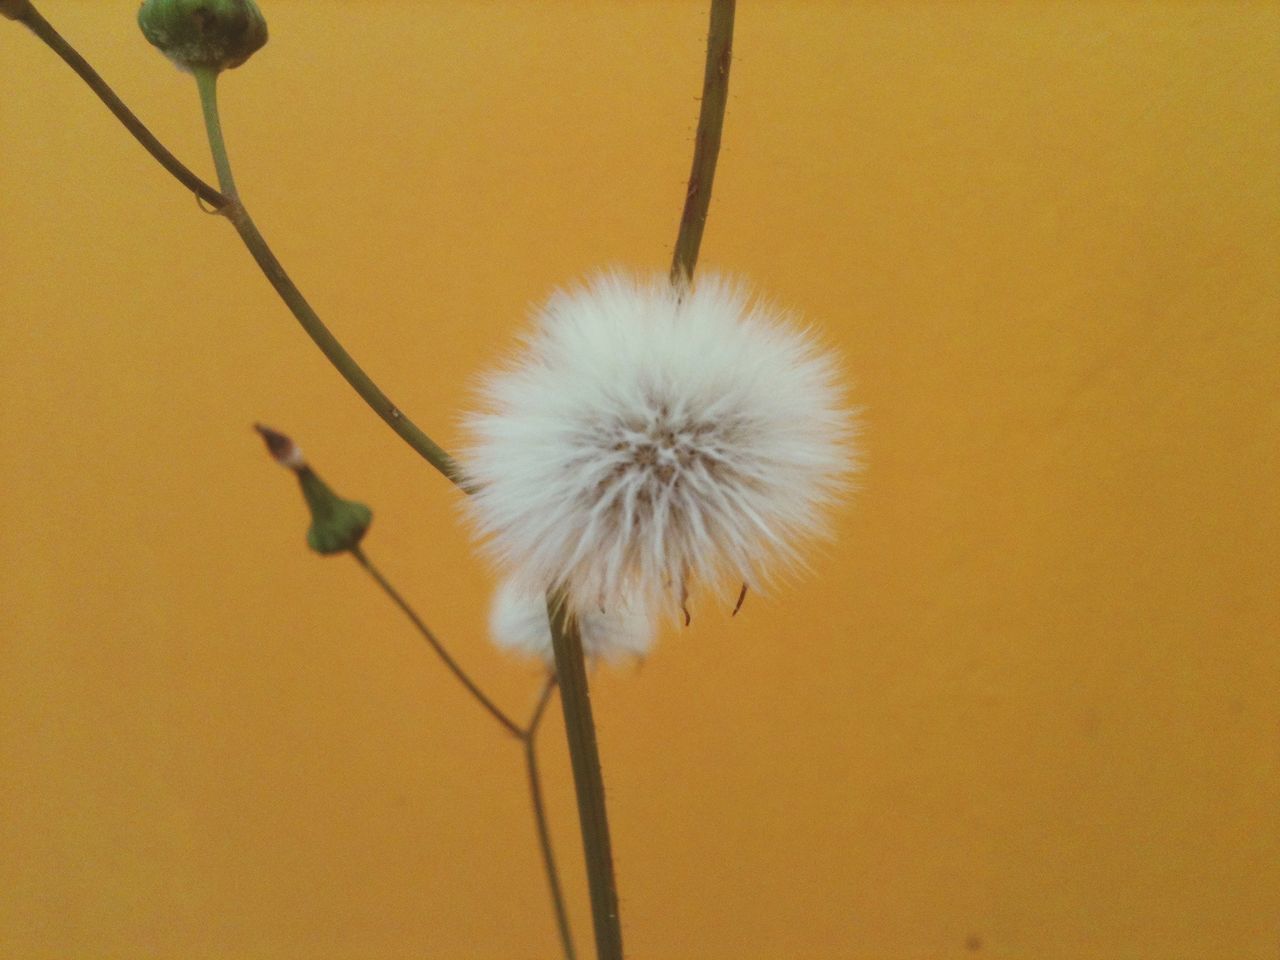 flower, fragility, dandelion, flower head, single flower, stem, close-up, freshness, growth, nature, beauty in nature, plant, softness, seed, botany, petal, no people, uncultivated, simplicity, outdoors